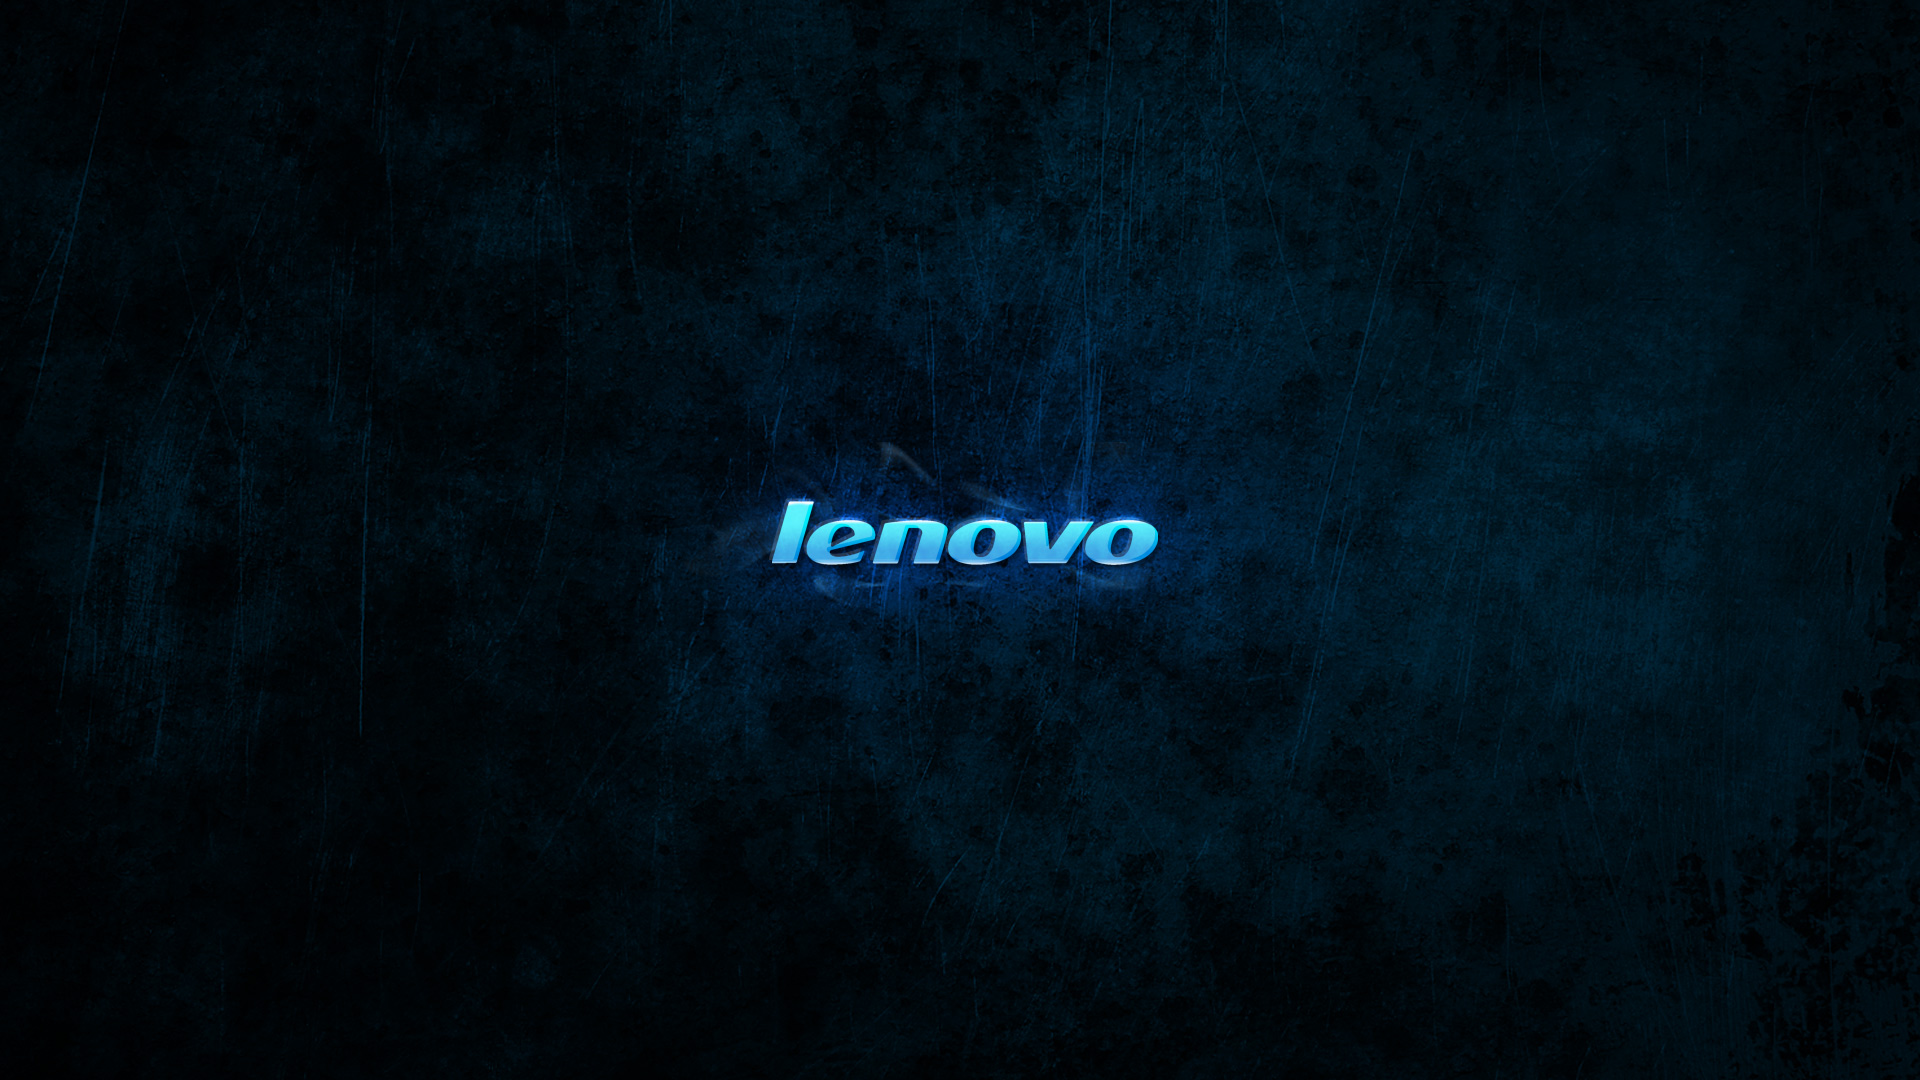 Lenovo Windows Wallpaper Pictures In High Definition Or